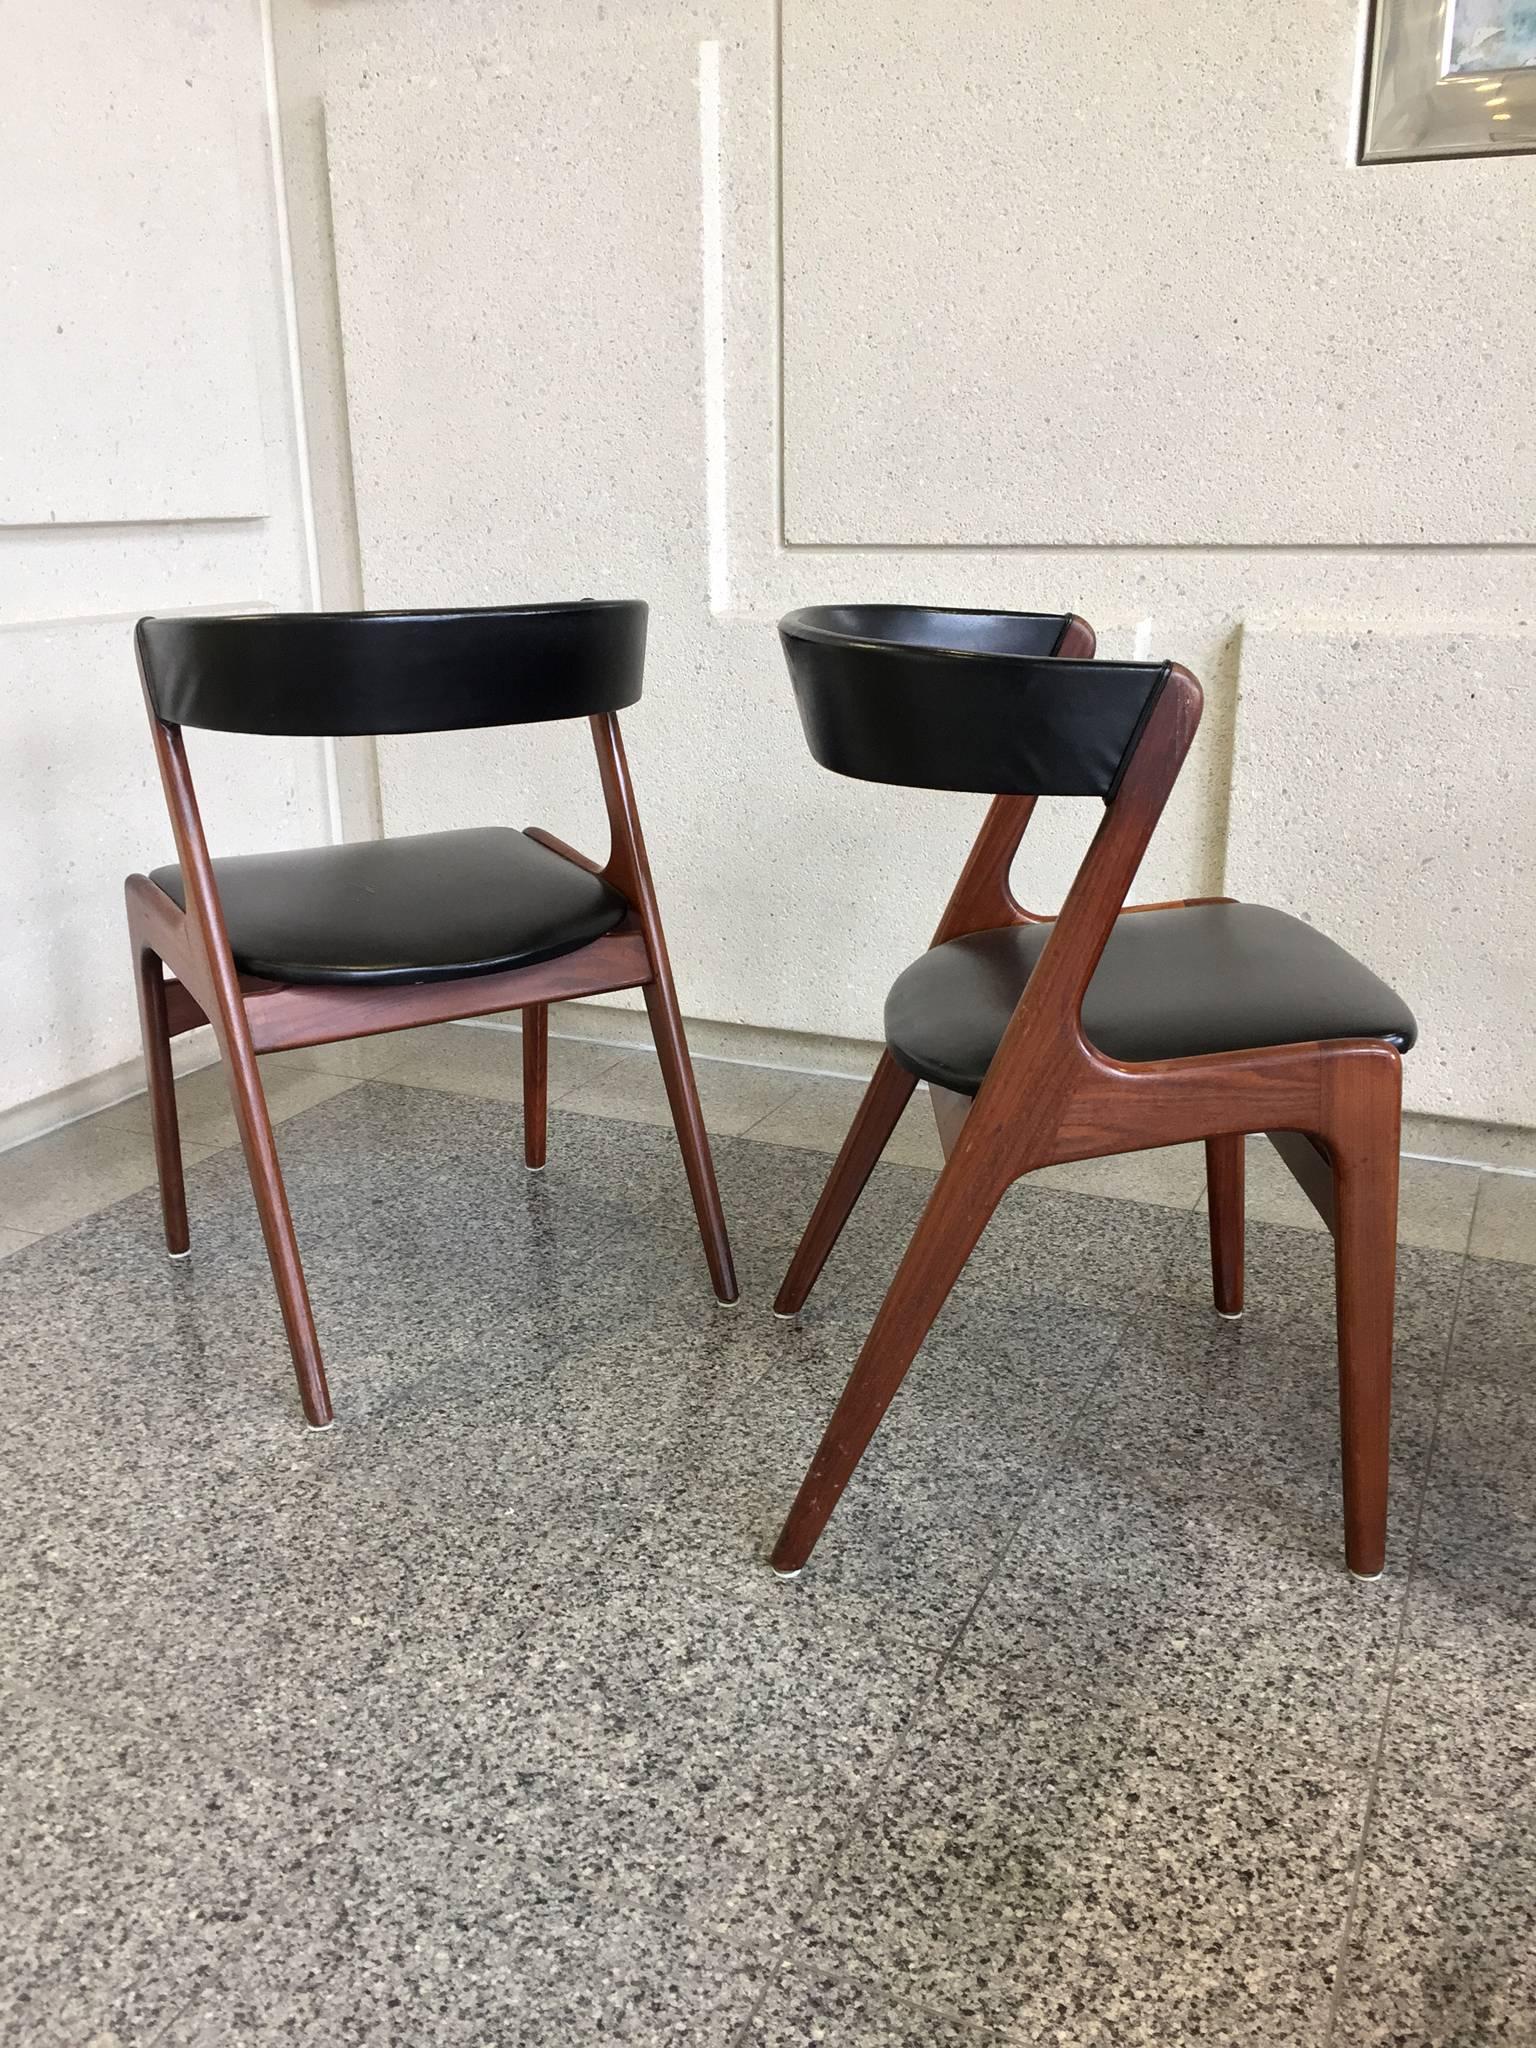 Faux Leather Set of Six Midcentury Danish Teak and Black Skai Dining Chairs by Omann Jun